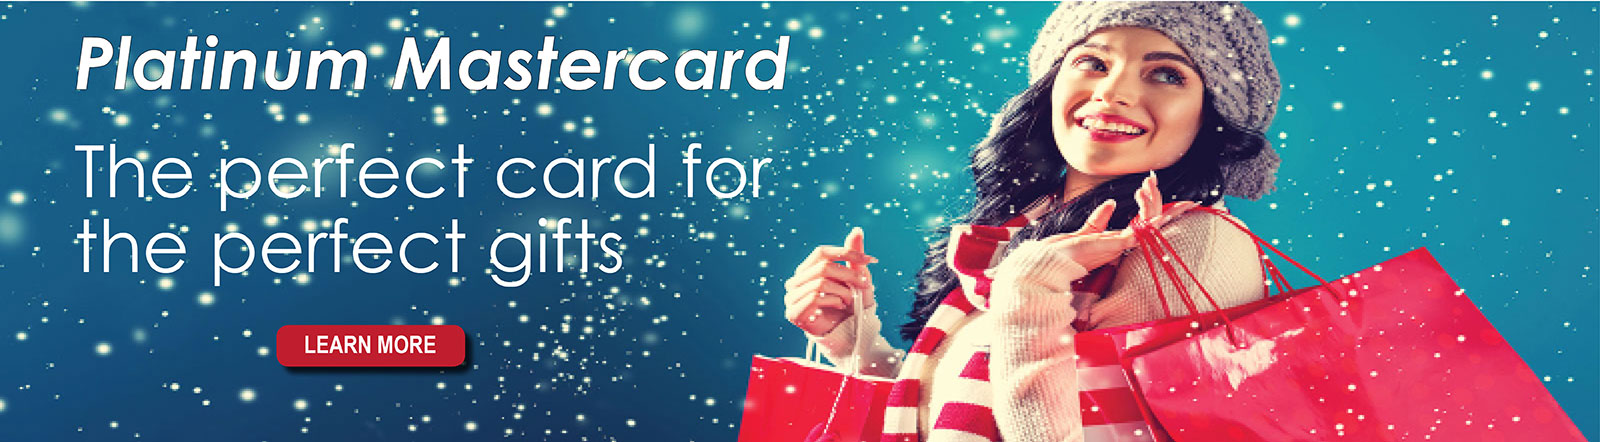 Platinum Mastercard-The perfect card for the perfect gifts